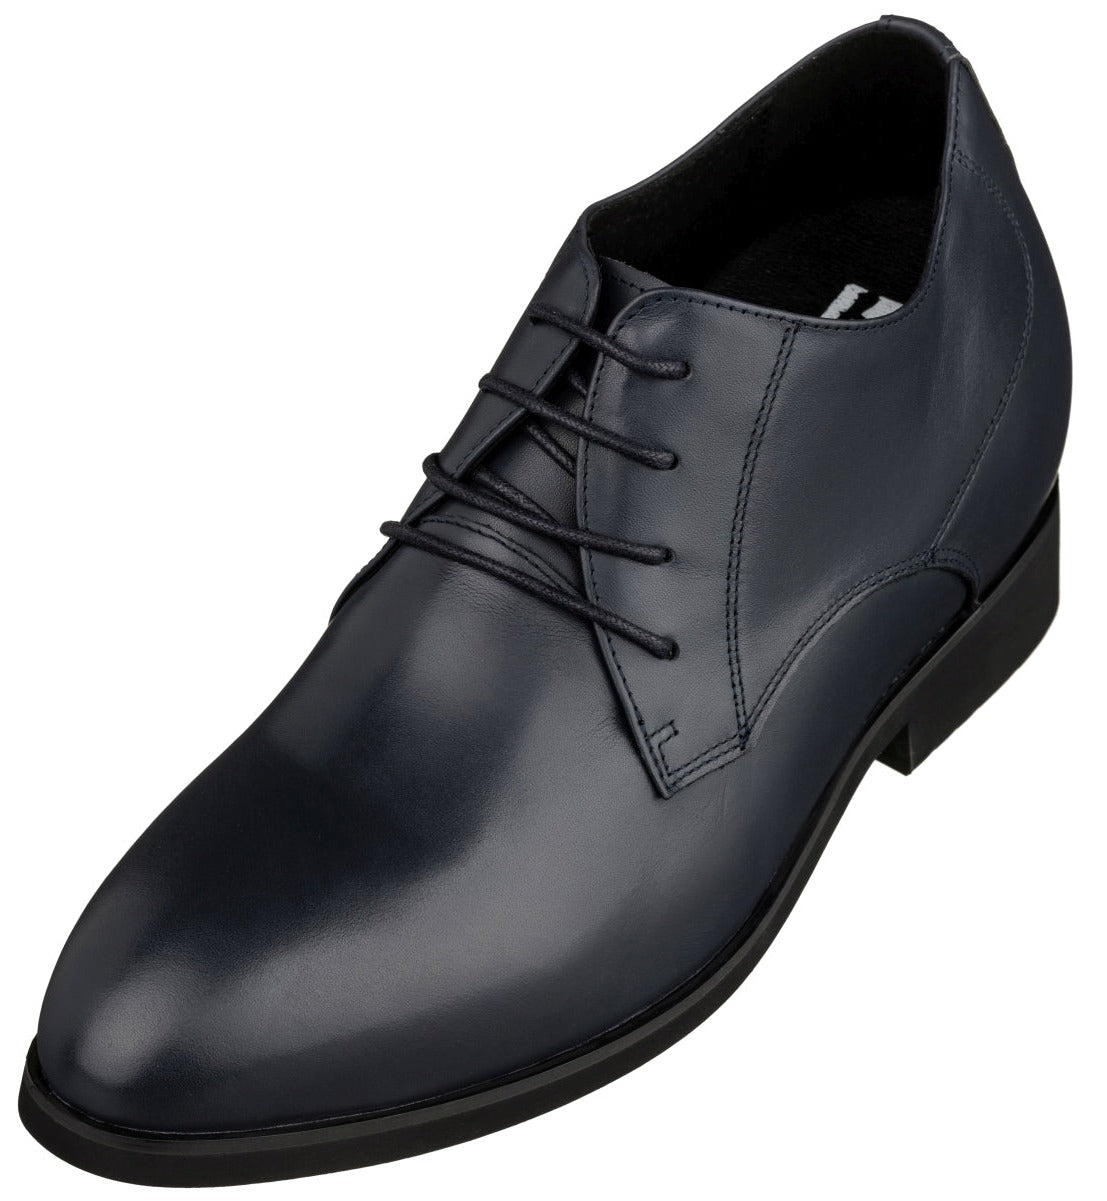 Elevator shoes height increase TOTO - K8008 - 3.6 Inches Taller (Slate Blue) - Dress Oxford